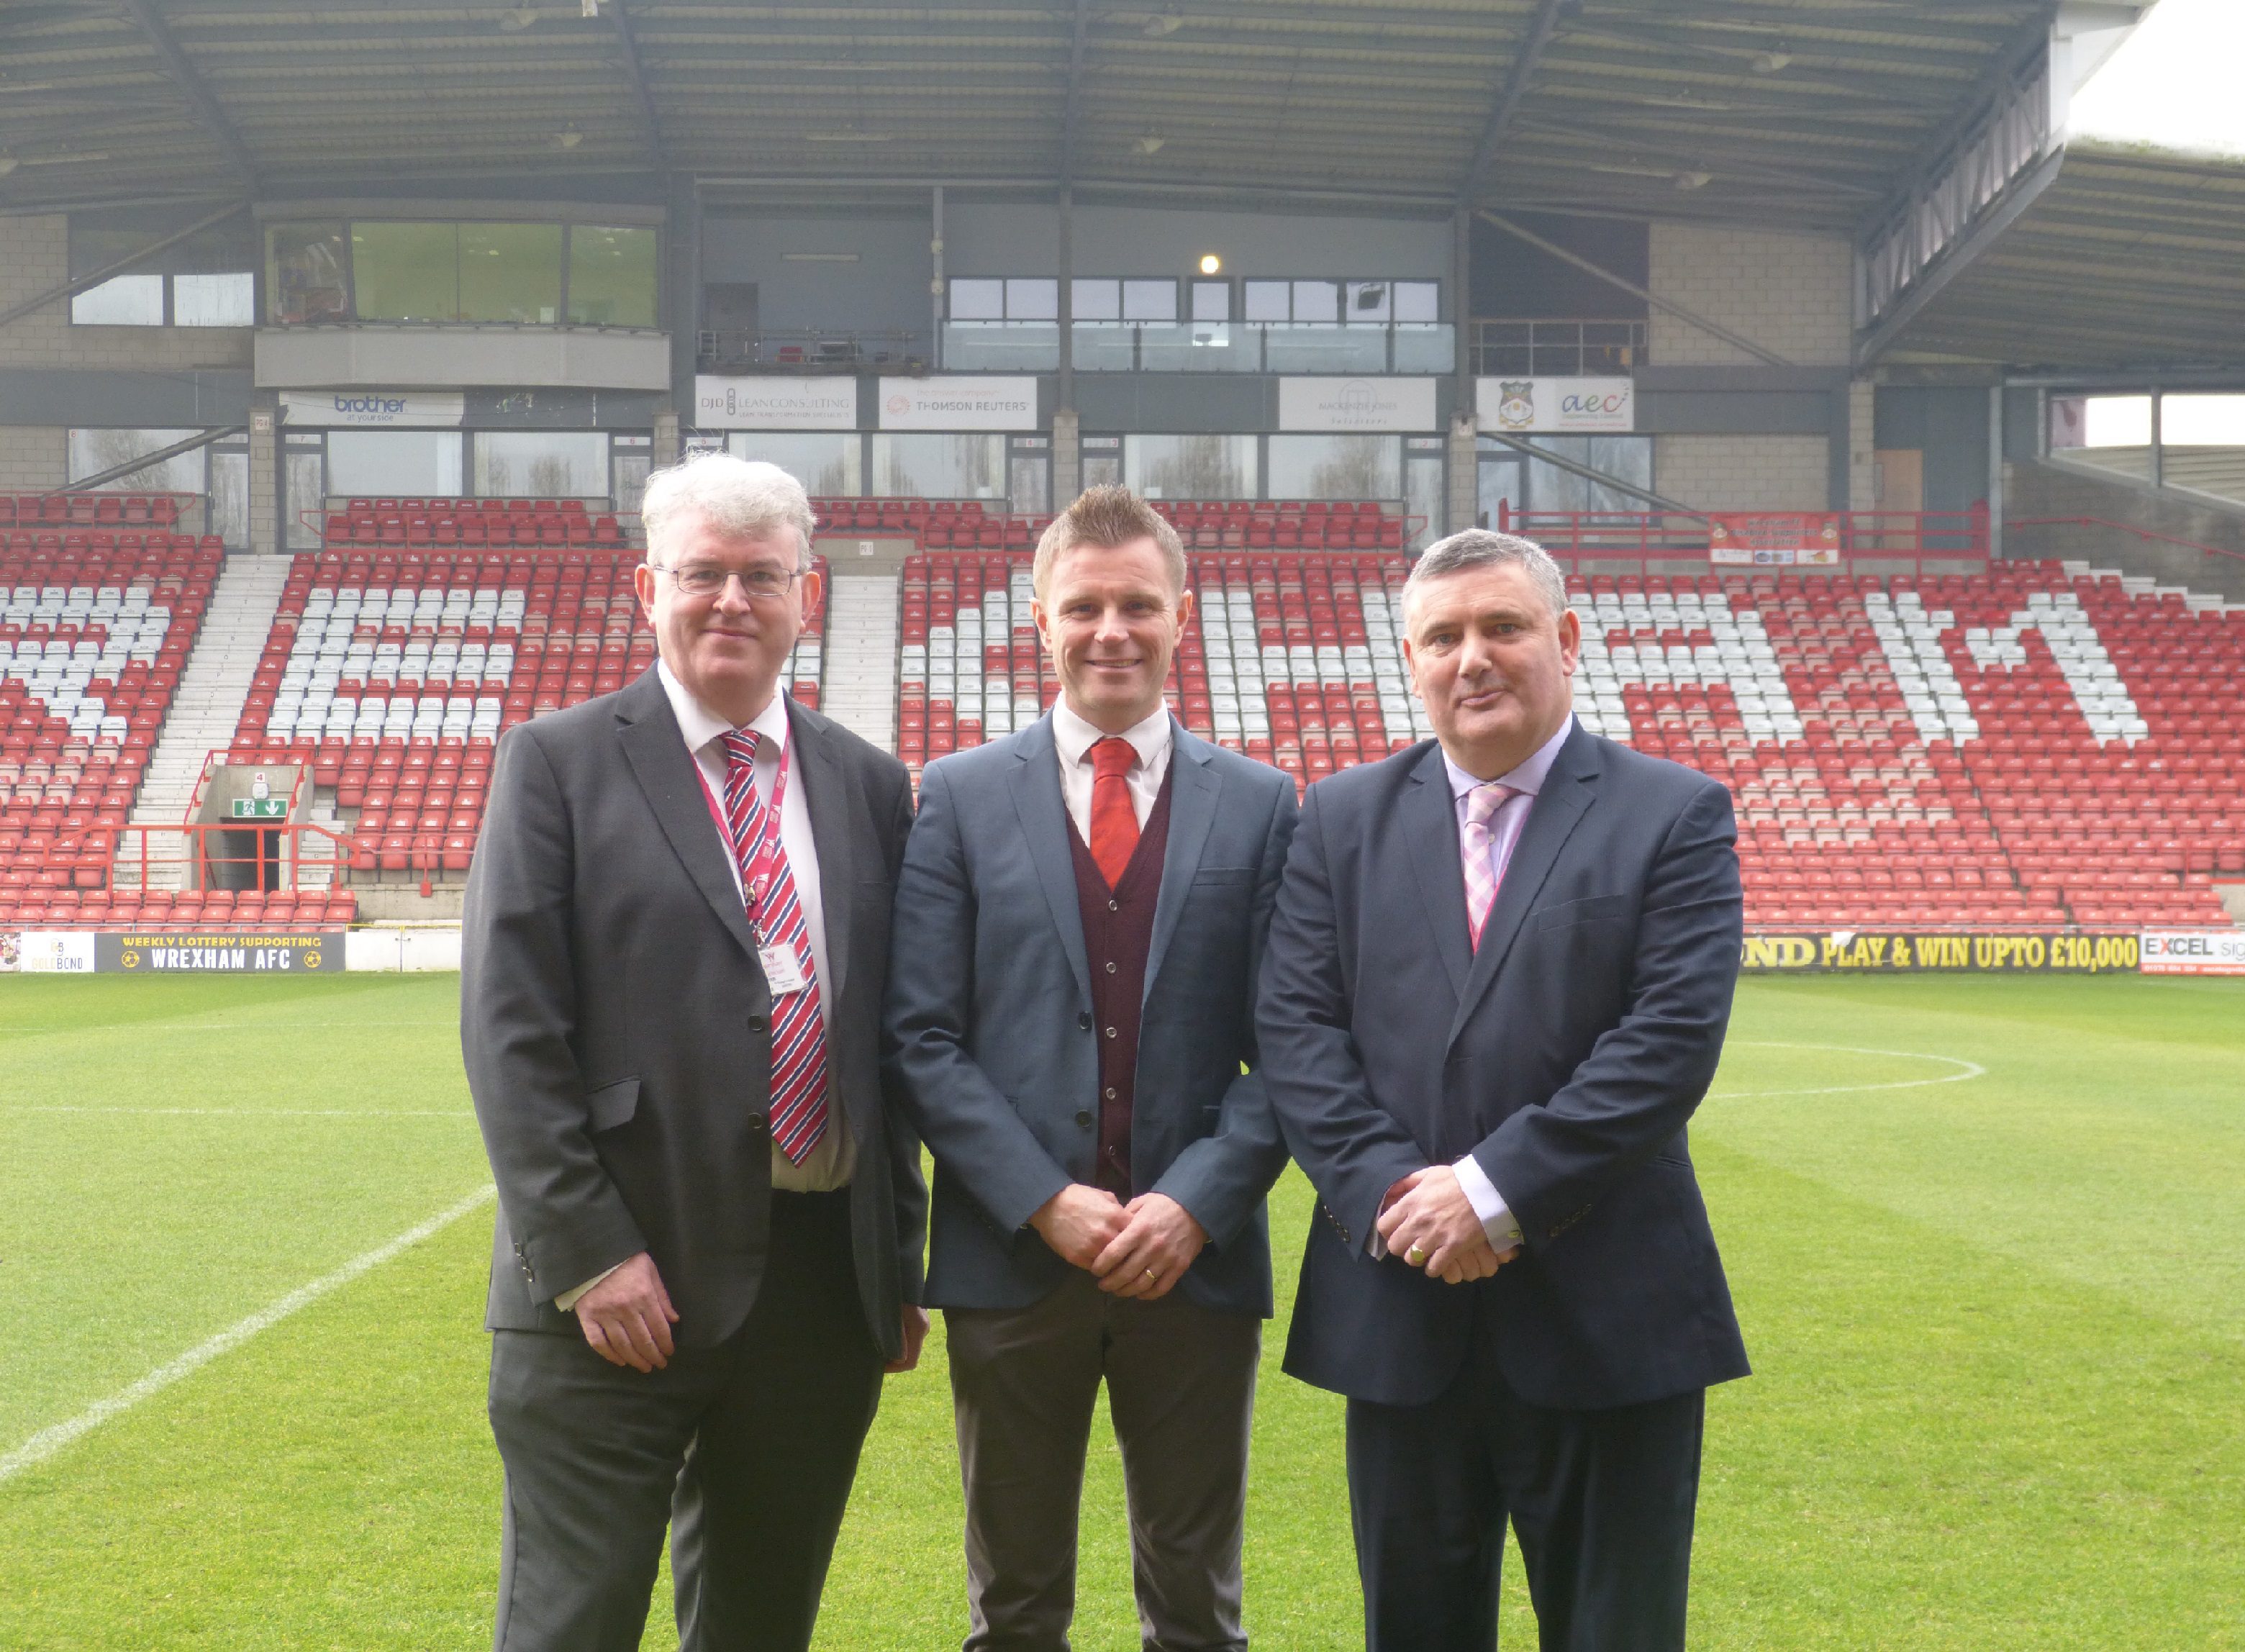 Wrexham AFC proposes new Groves training ground to Wrexham Council